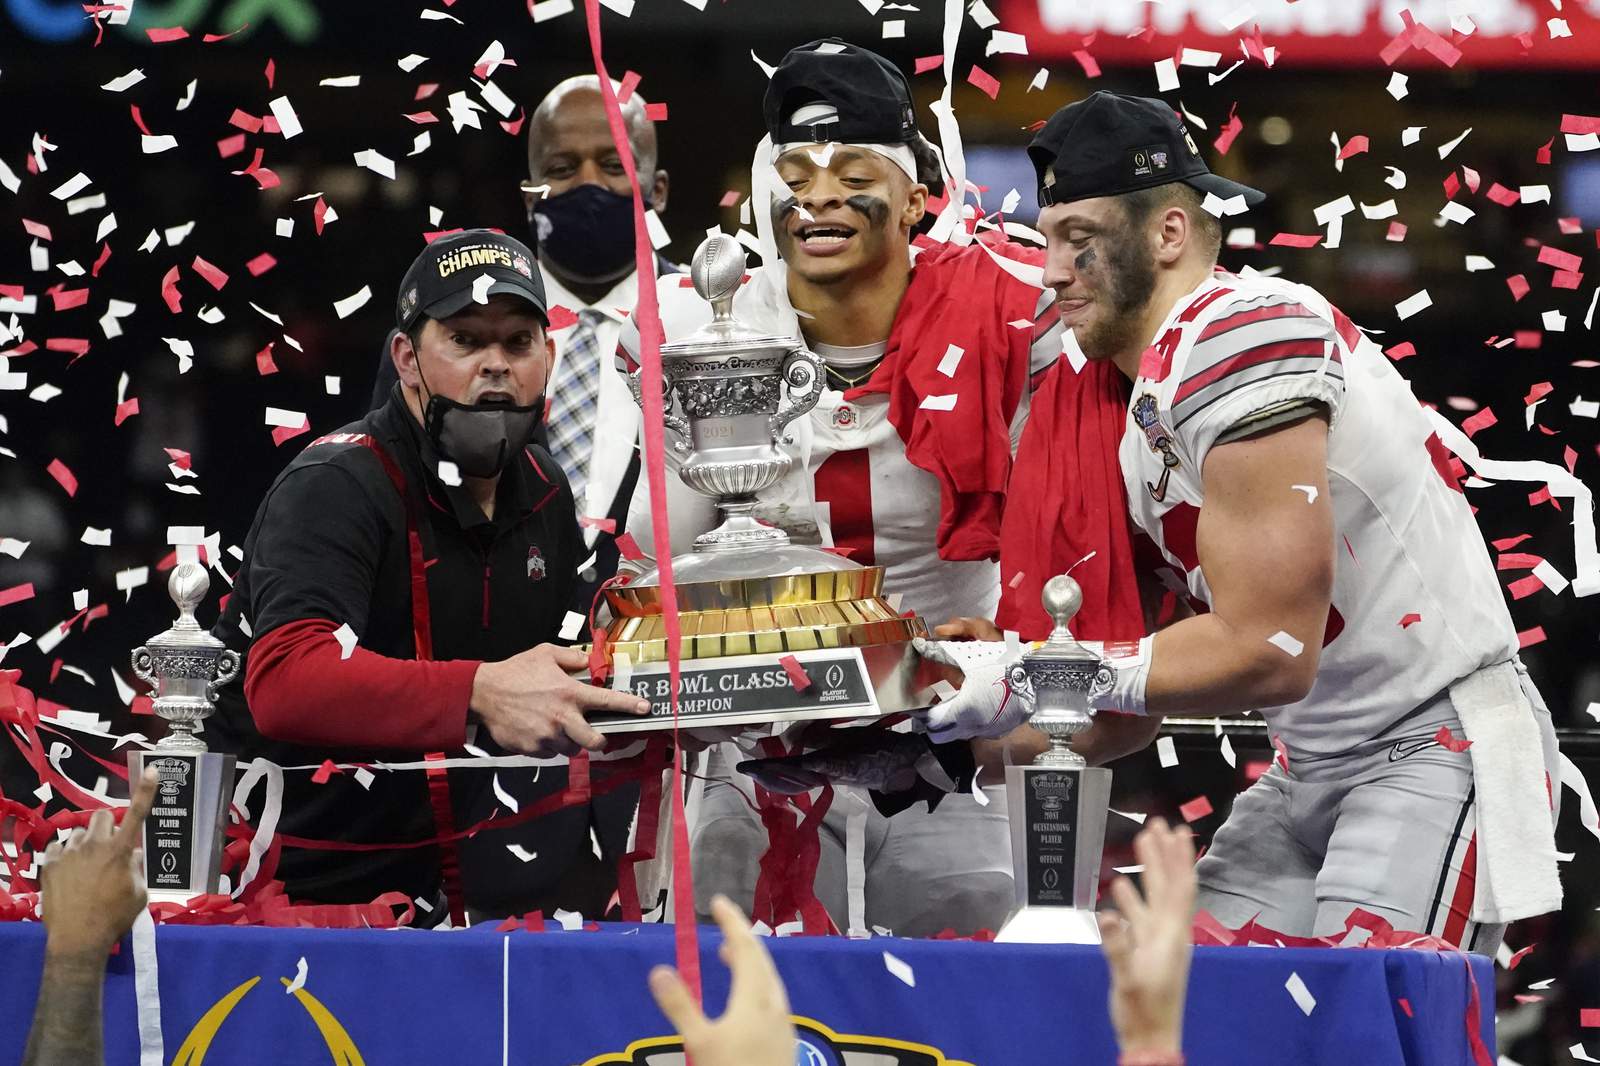 Alabama, Ohio State travel different paths to title game